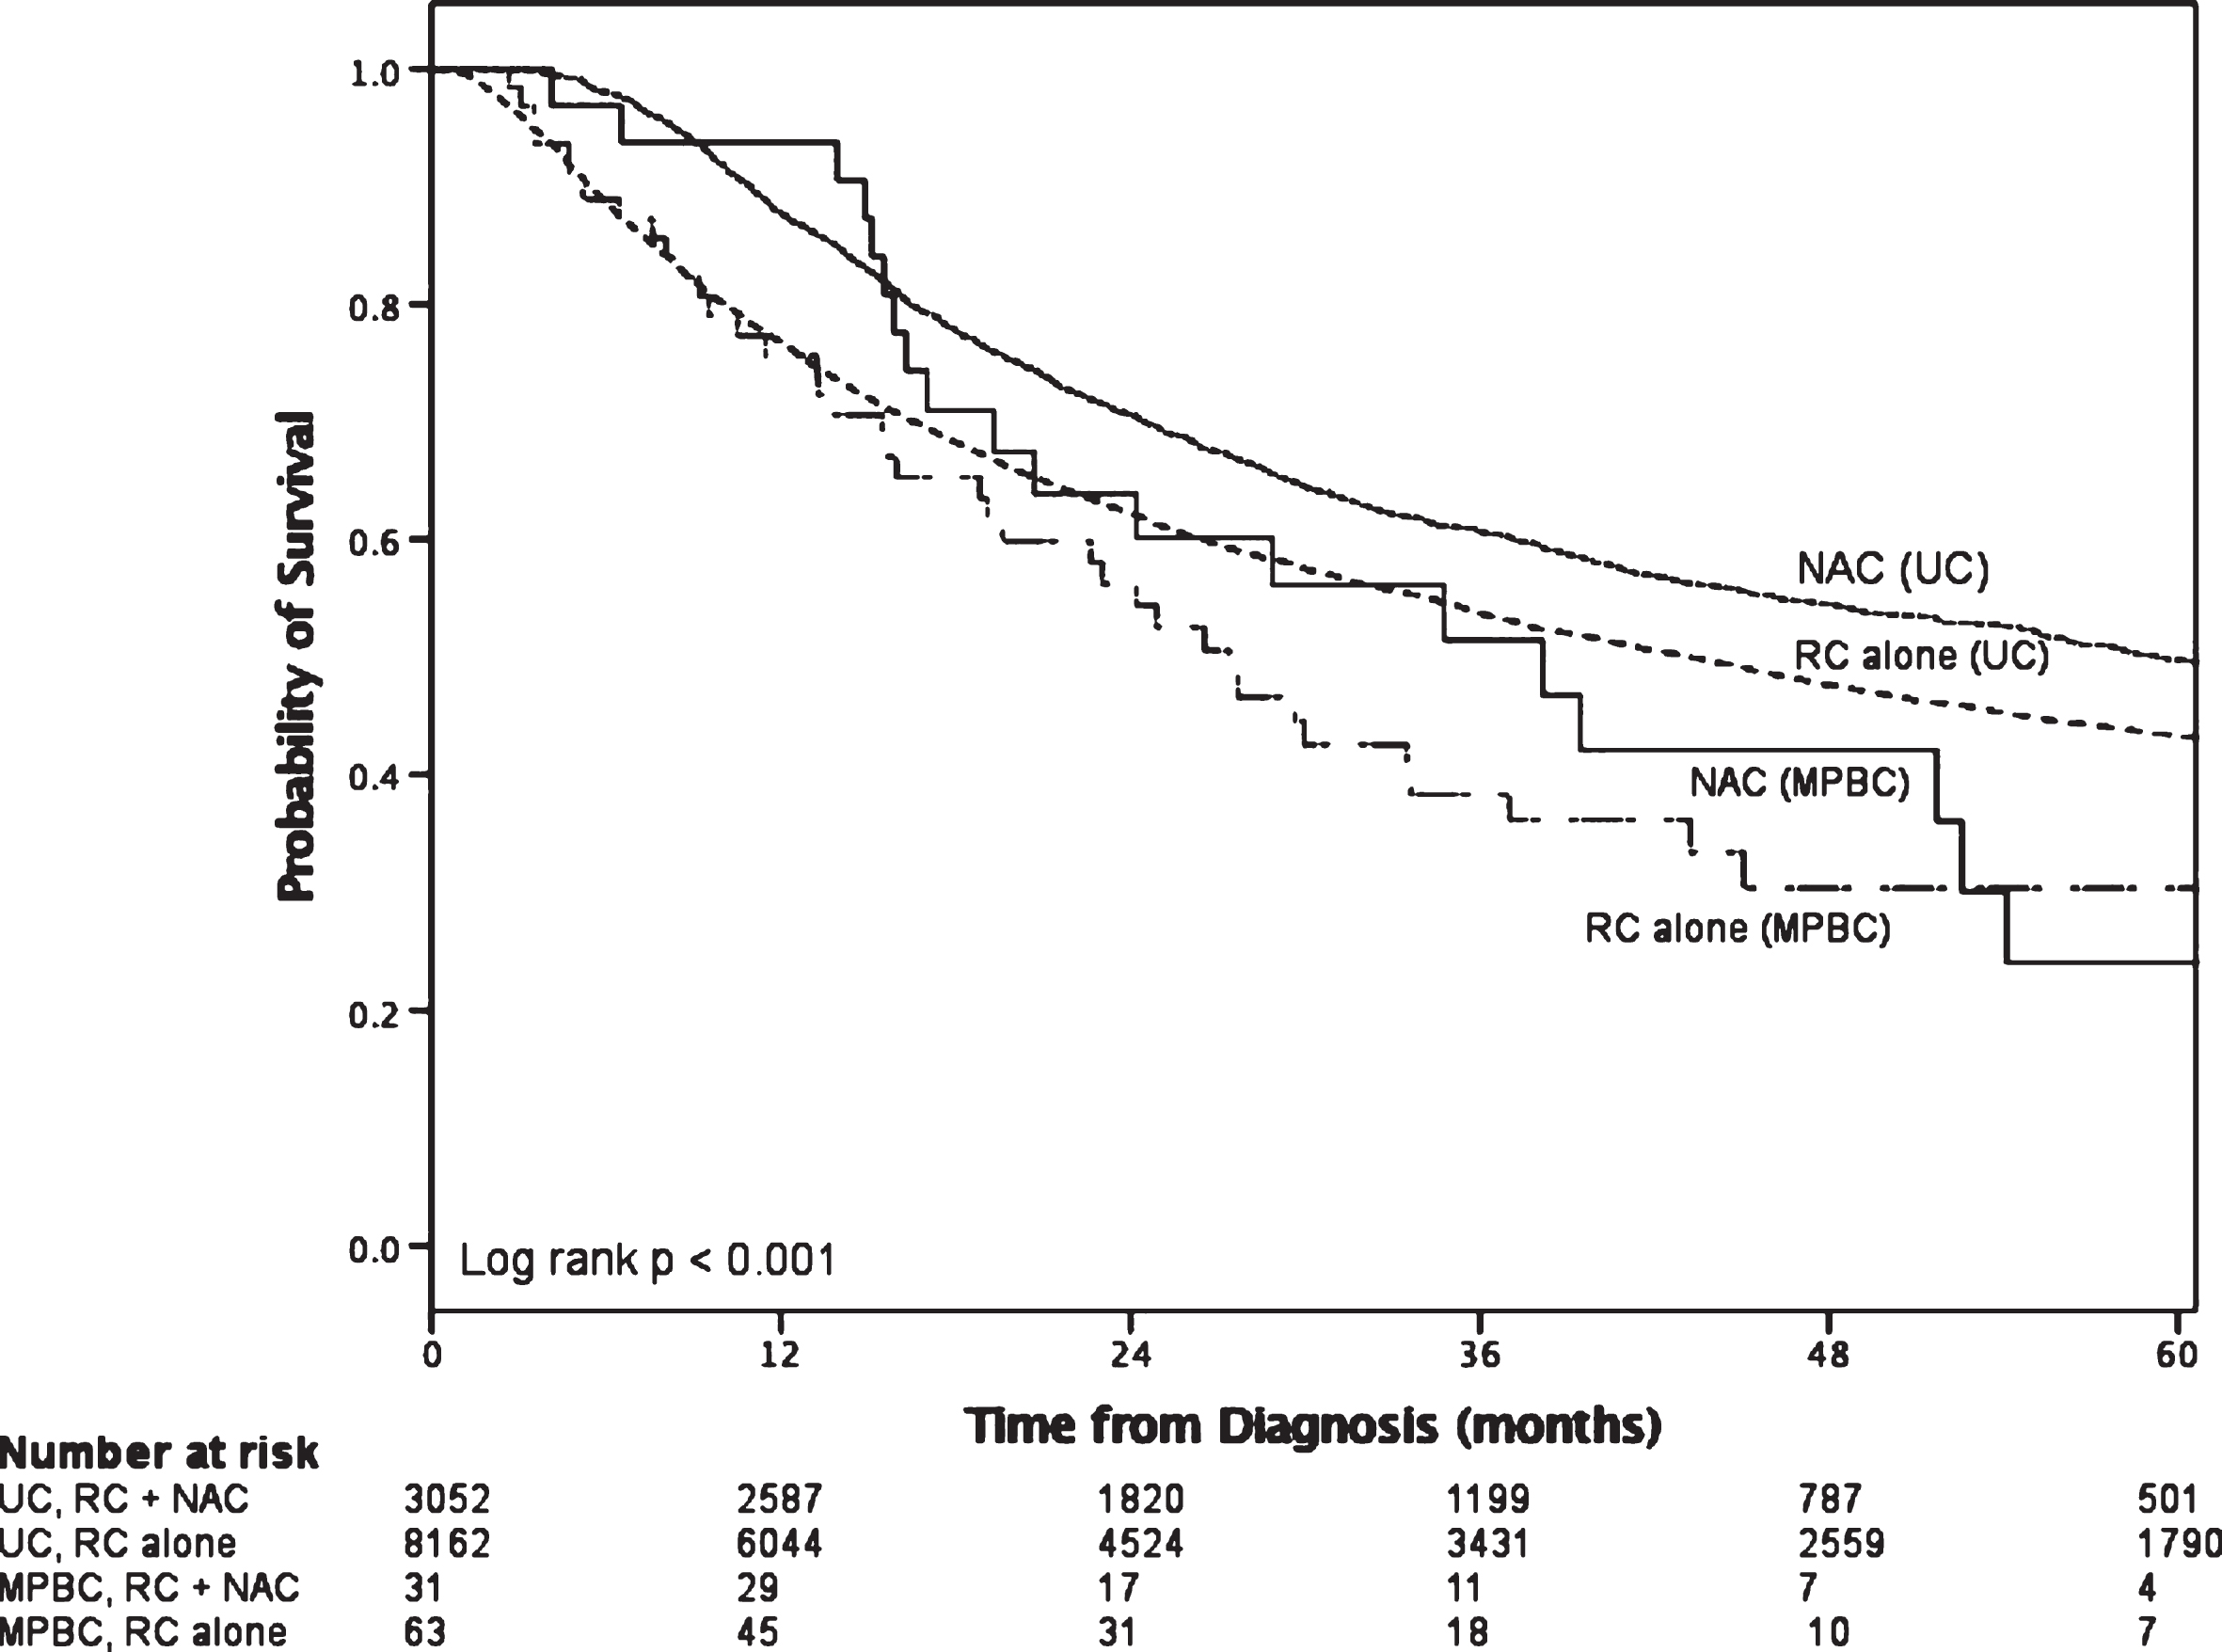 Survival in patients with≥cT2 disease who received radical cystectomy stratified by histology and utilization of neoadjuvant chemotherapy.